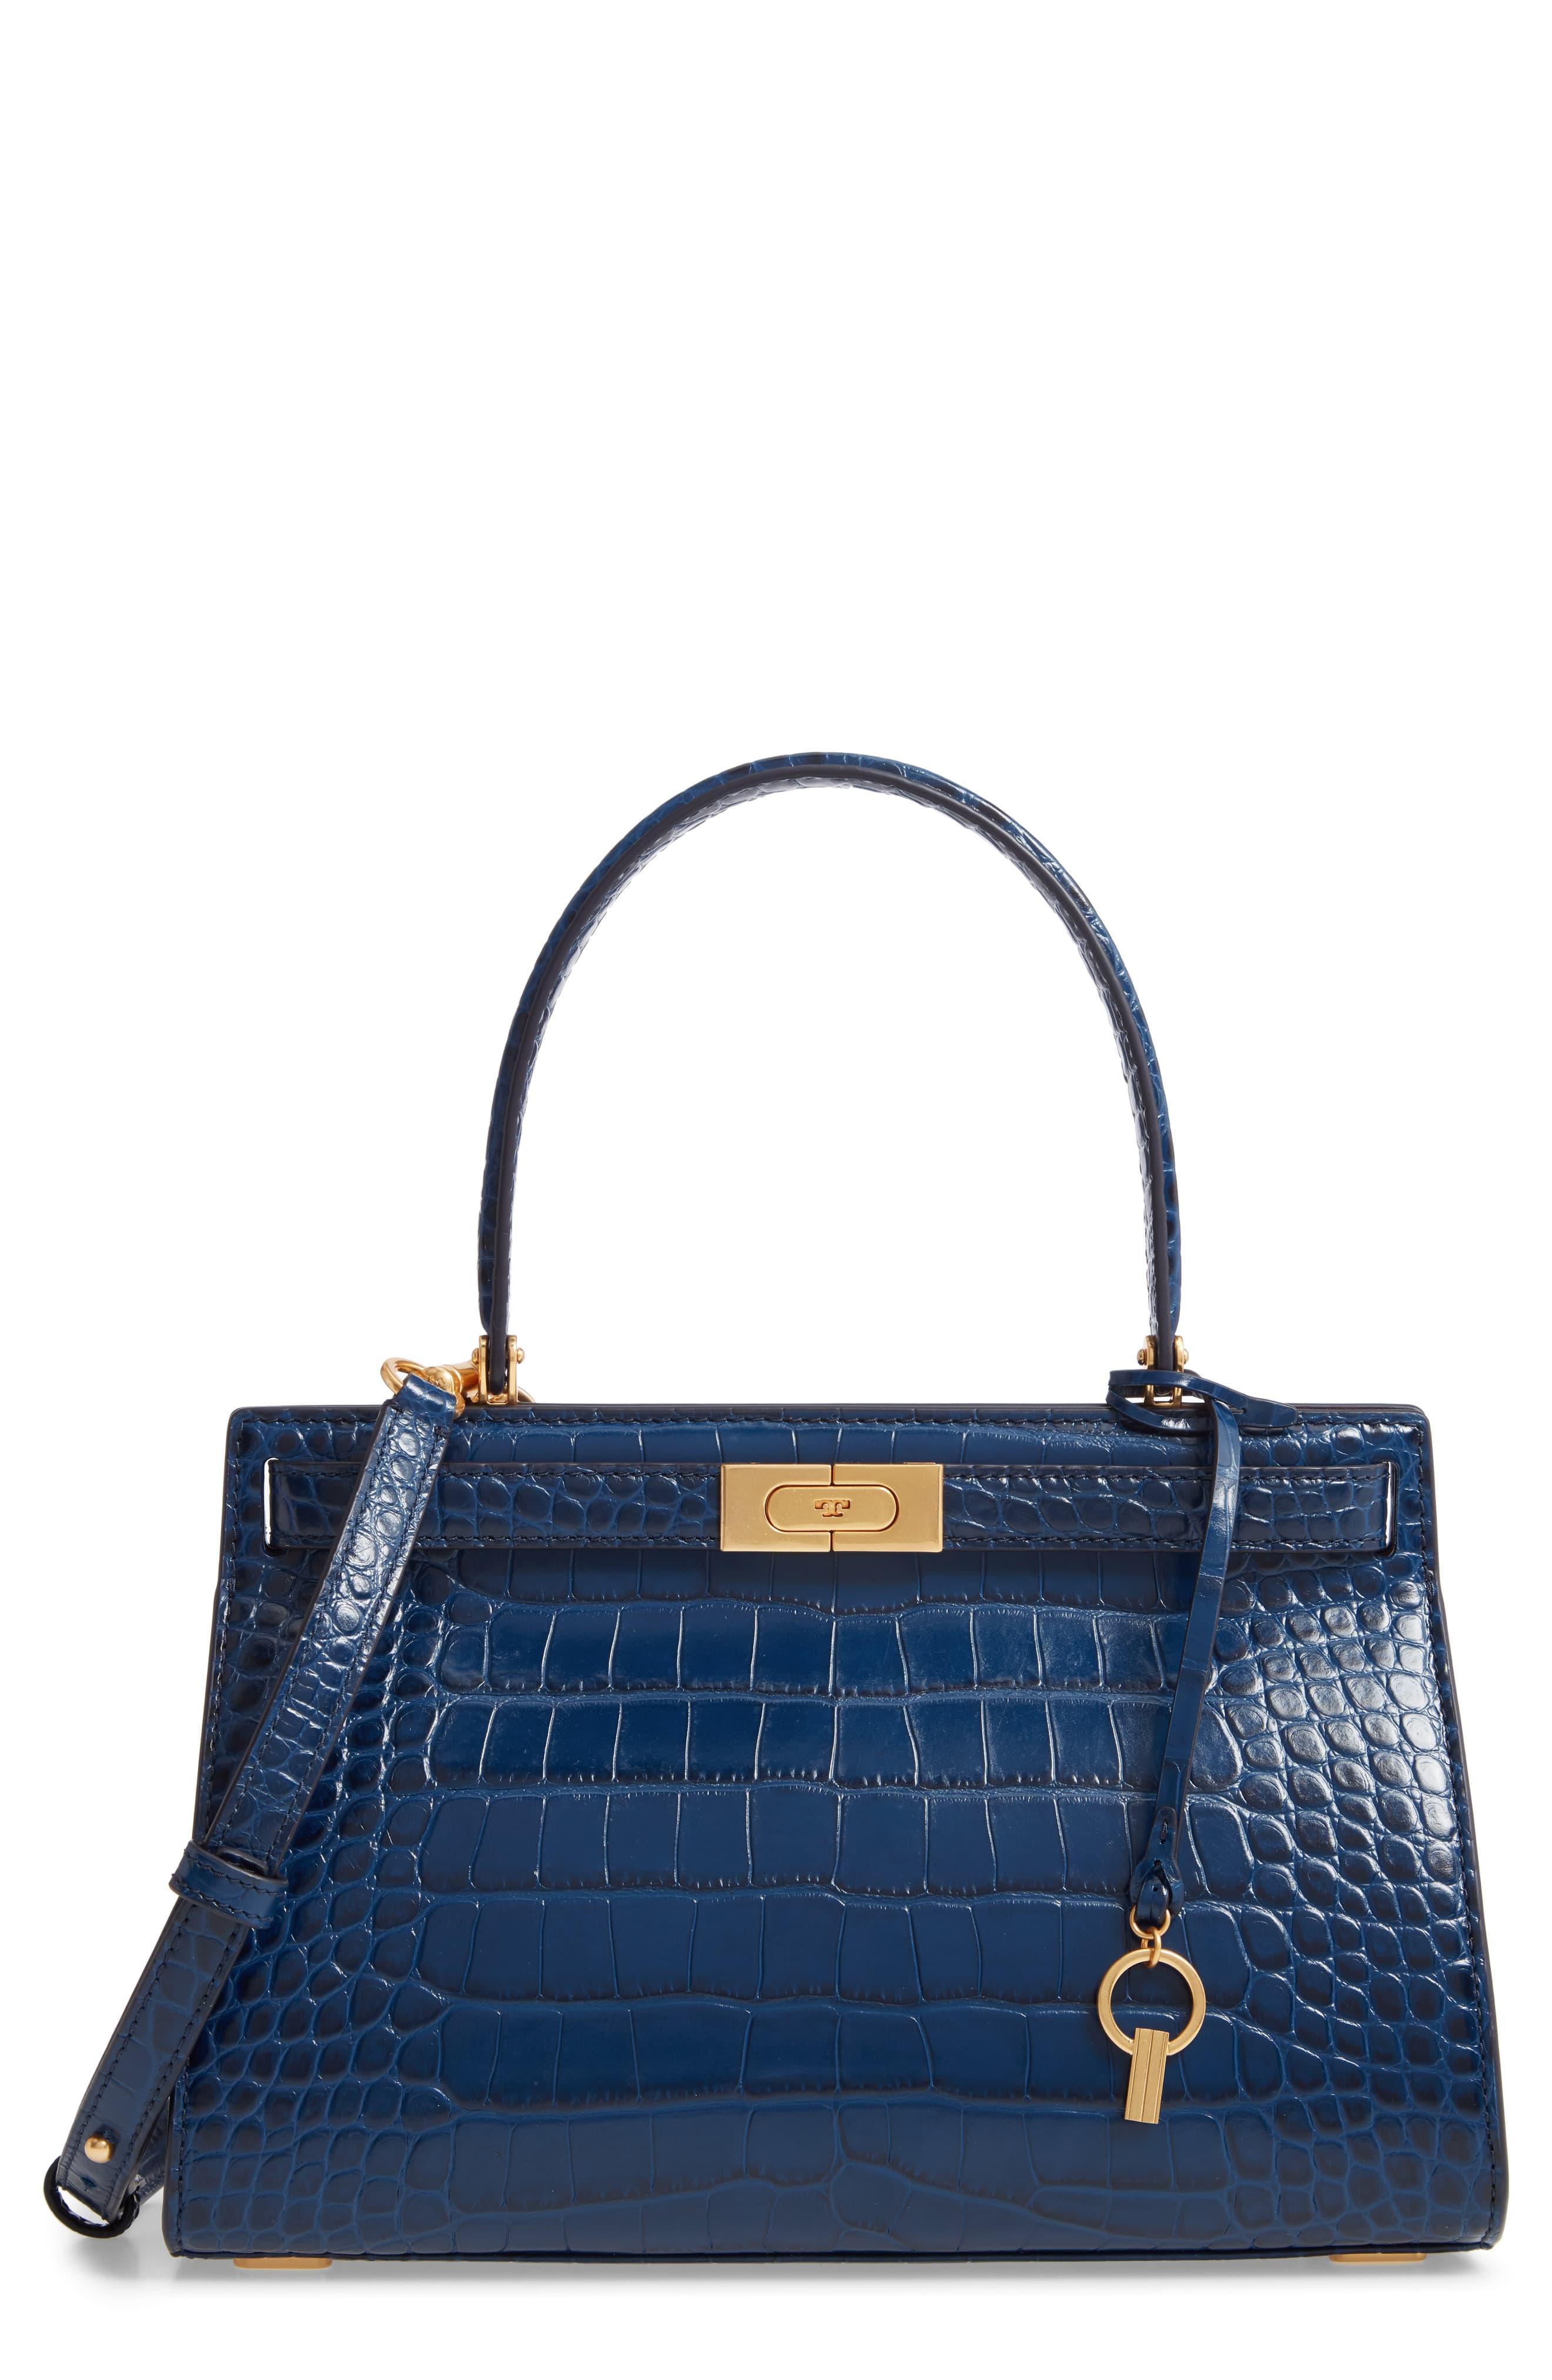 Tory Burch Leather Lee Radziwill Small Bag in Navy (Blue) - Lyst